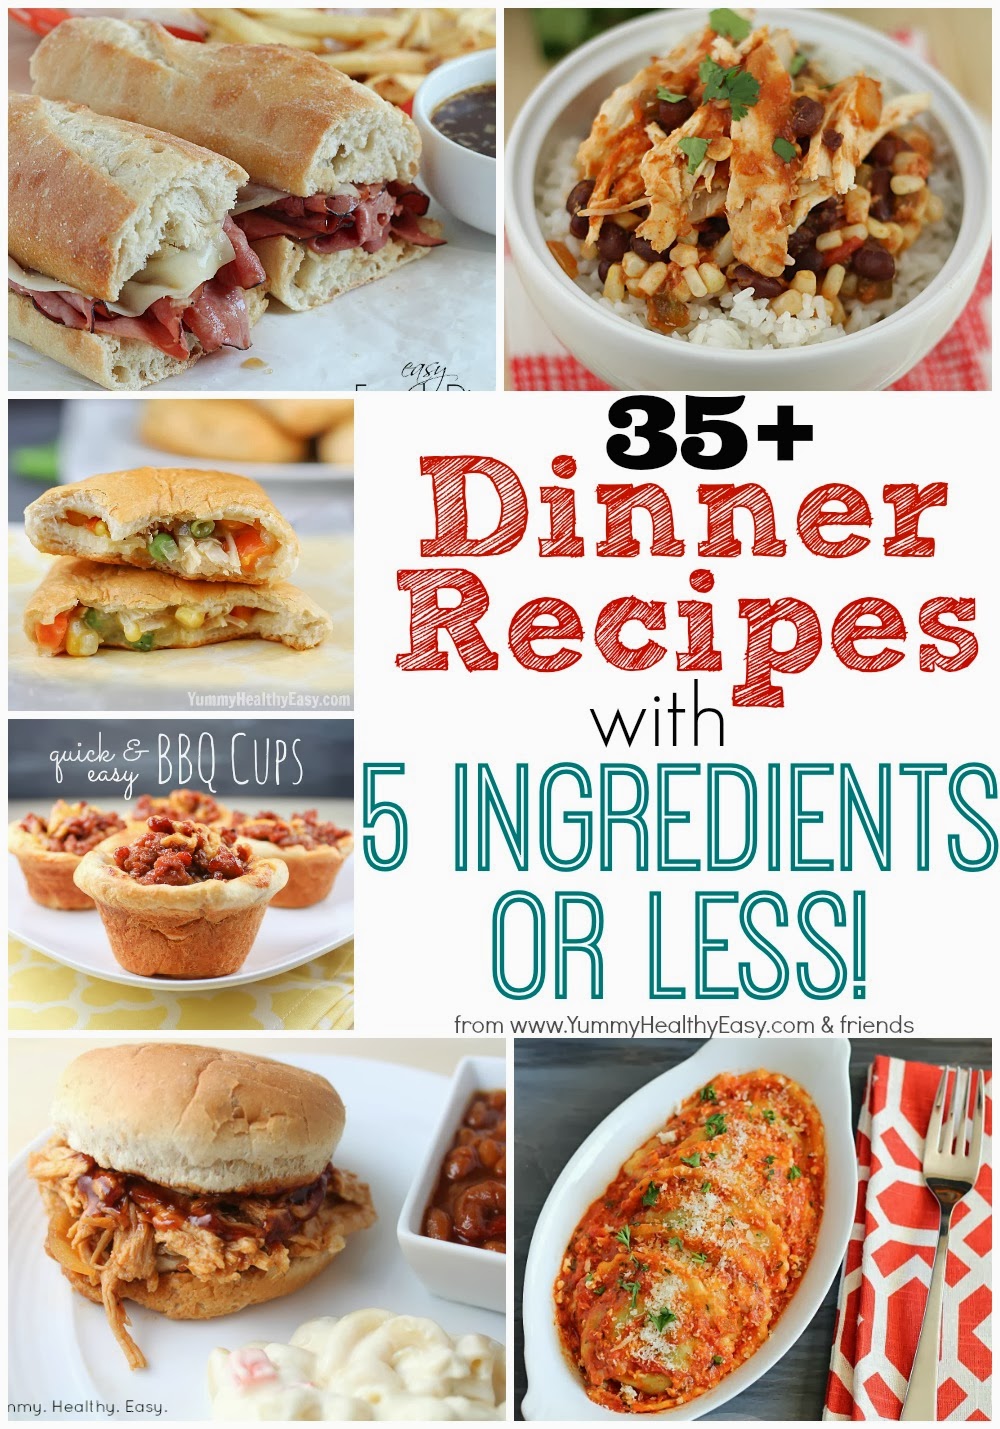 35+ Dinner Recipes with 5 Ingredients or Less! Yummy